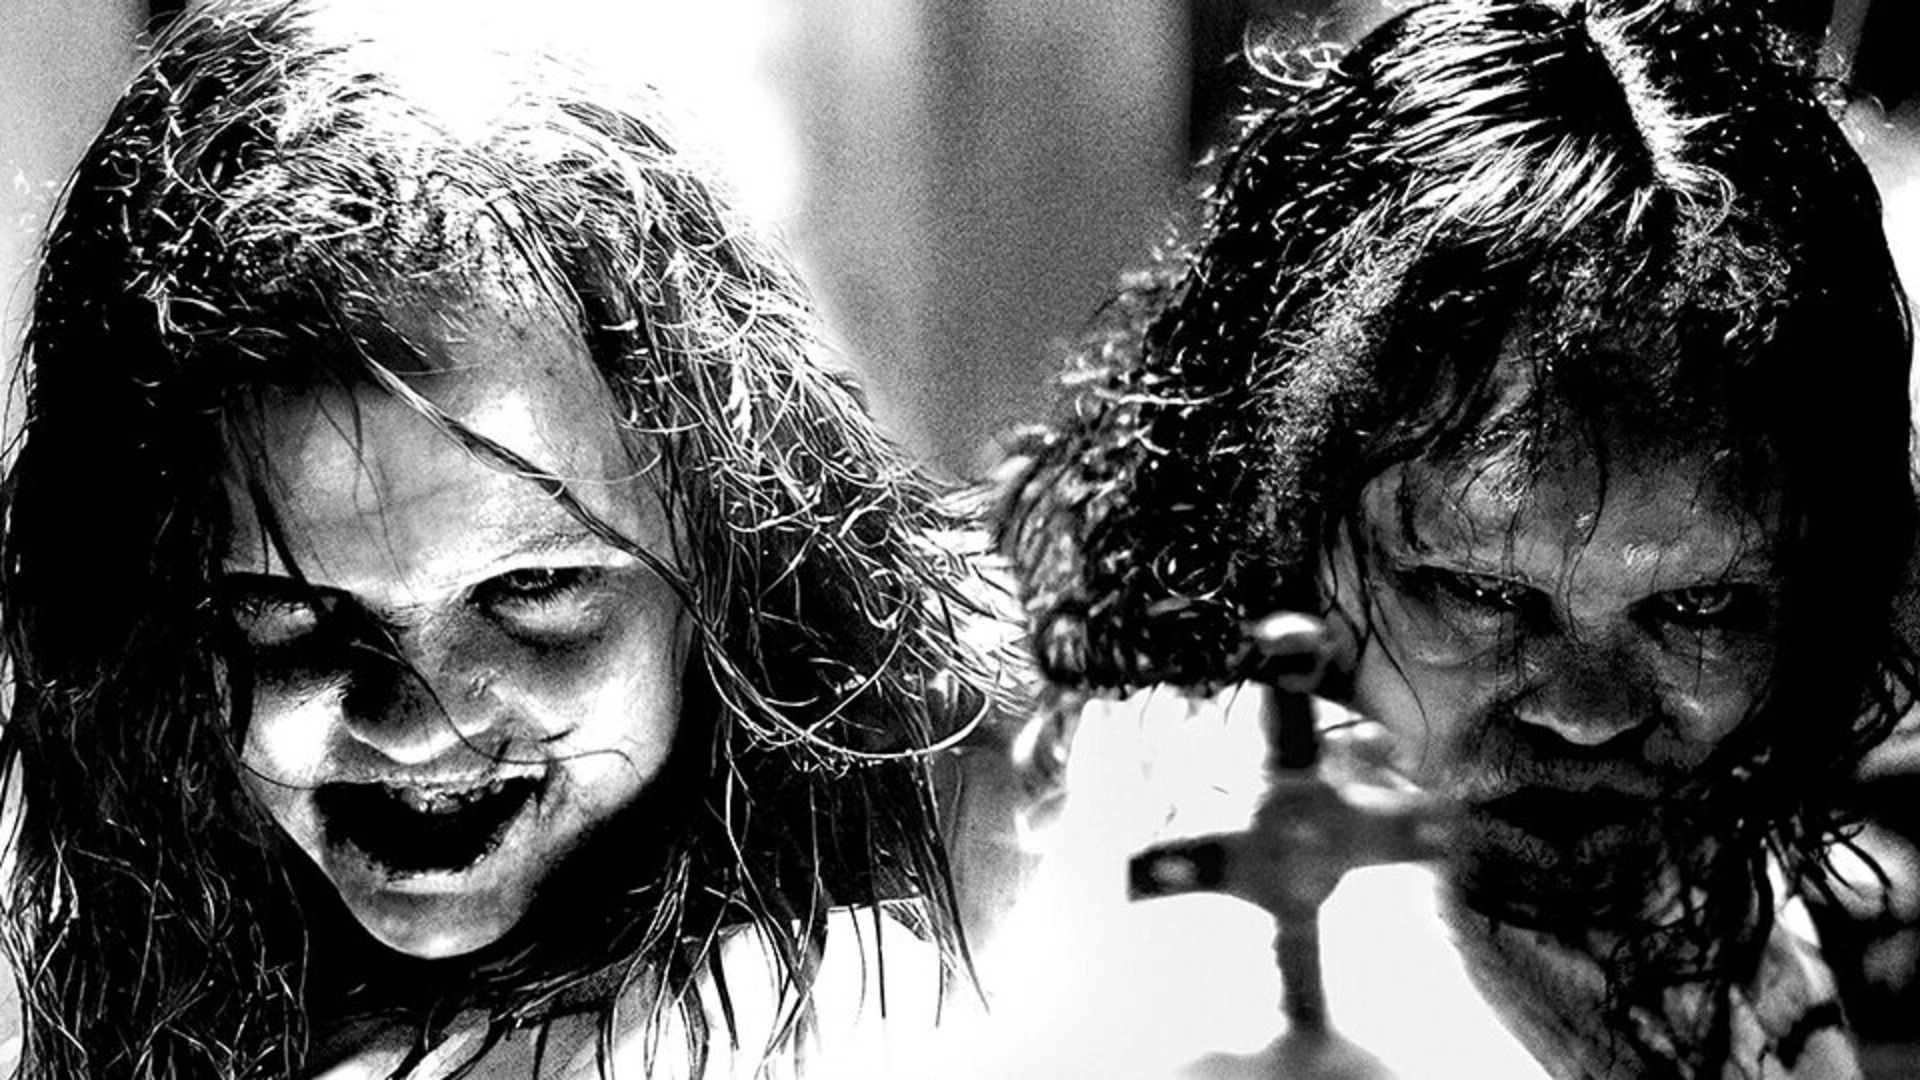 Despite "Believer" Hitting a Sour Note, Exorcist Saga Continues